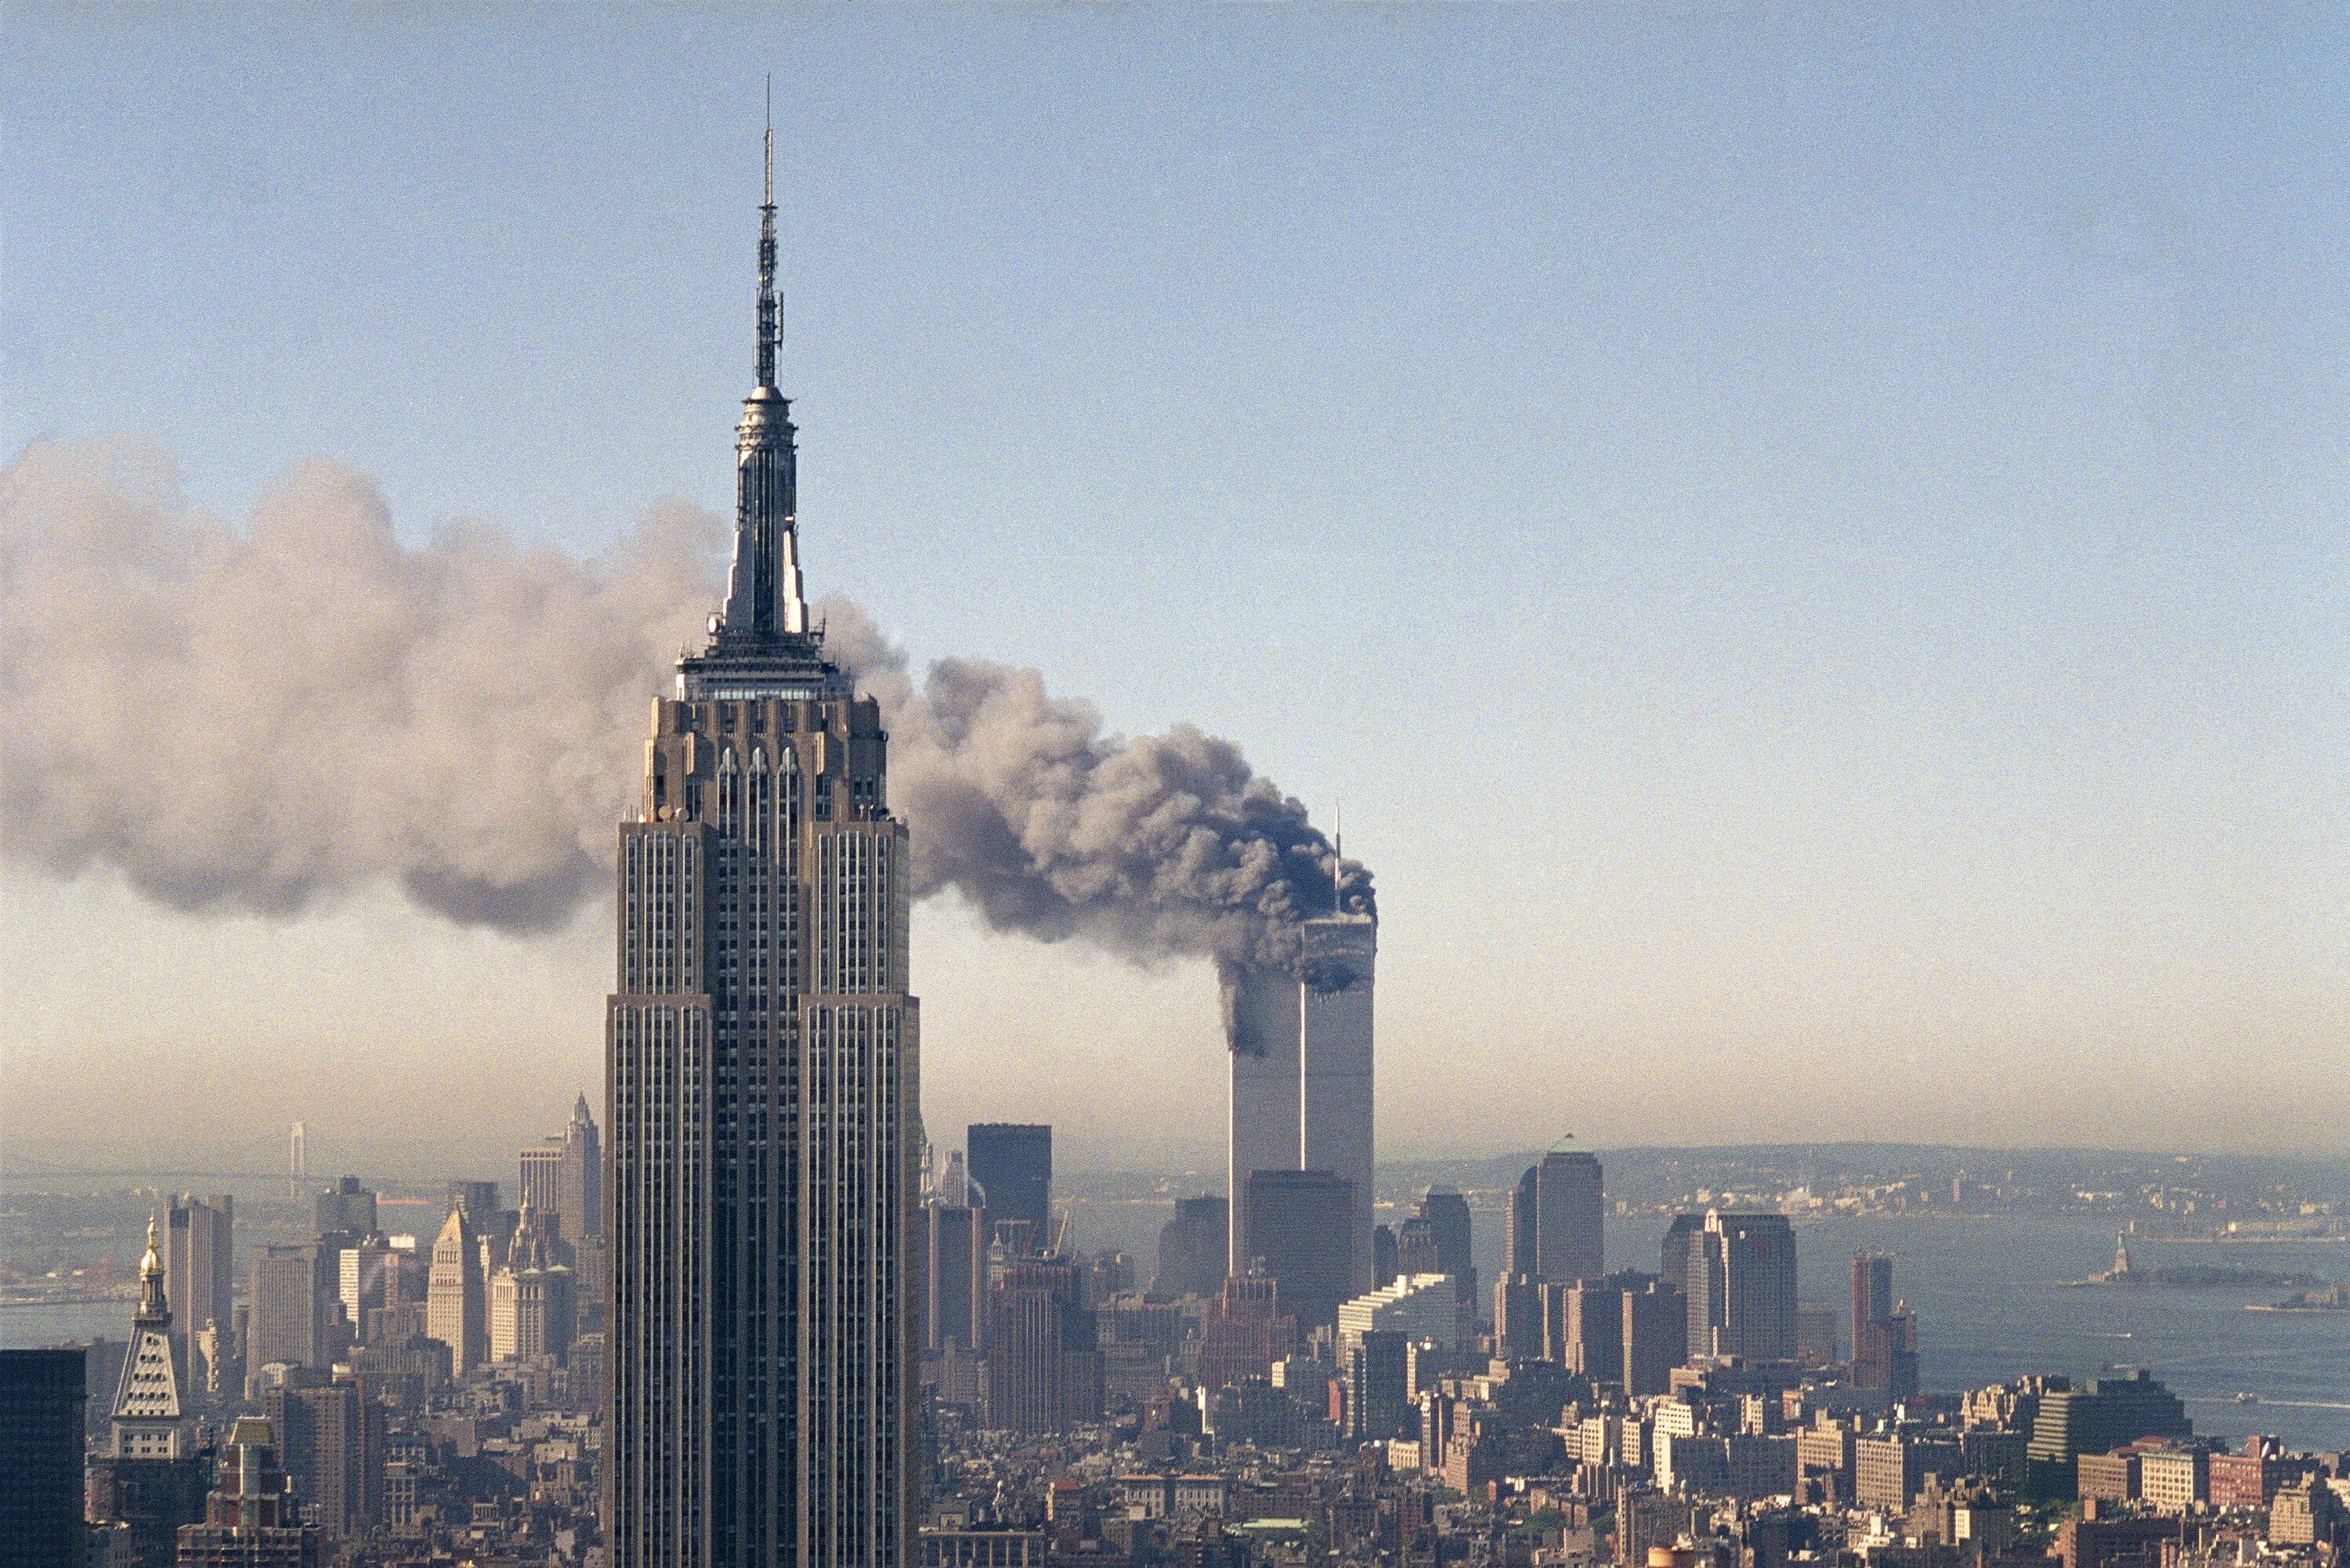 The Twin Towers burn behind the Empire State Building in New York on September 11, 2001. Photo: AP